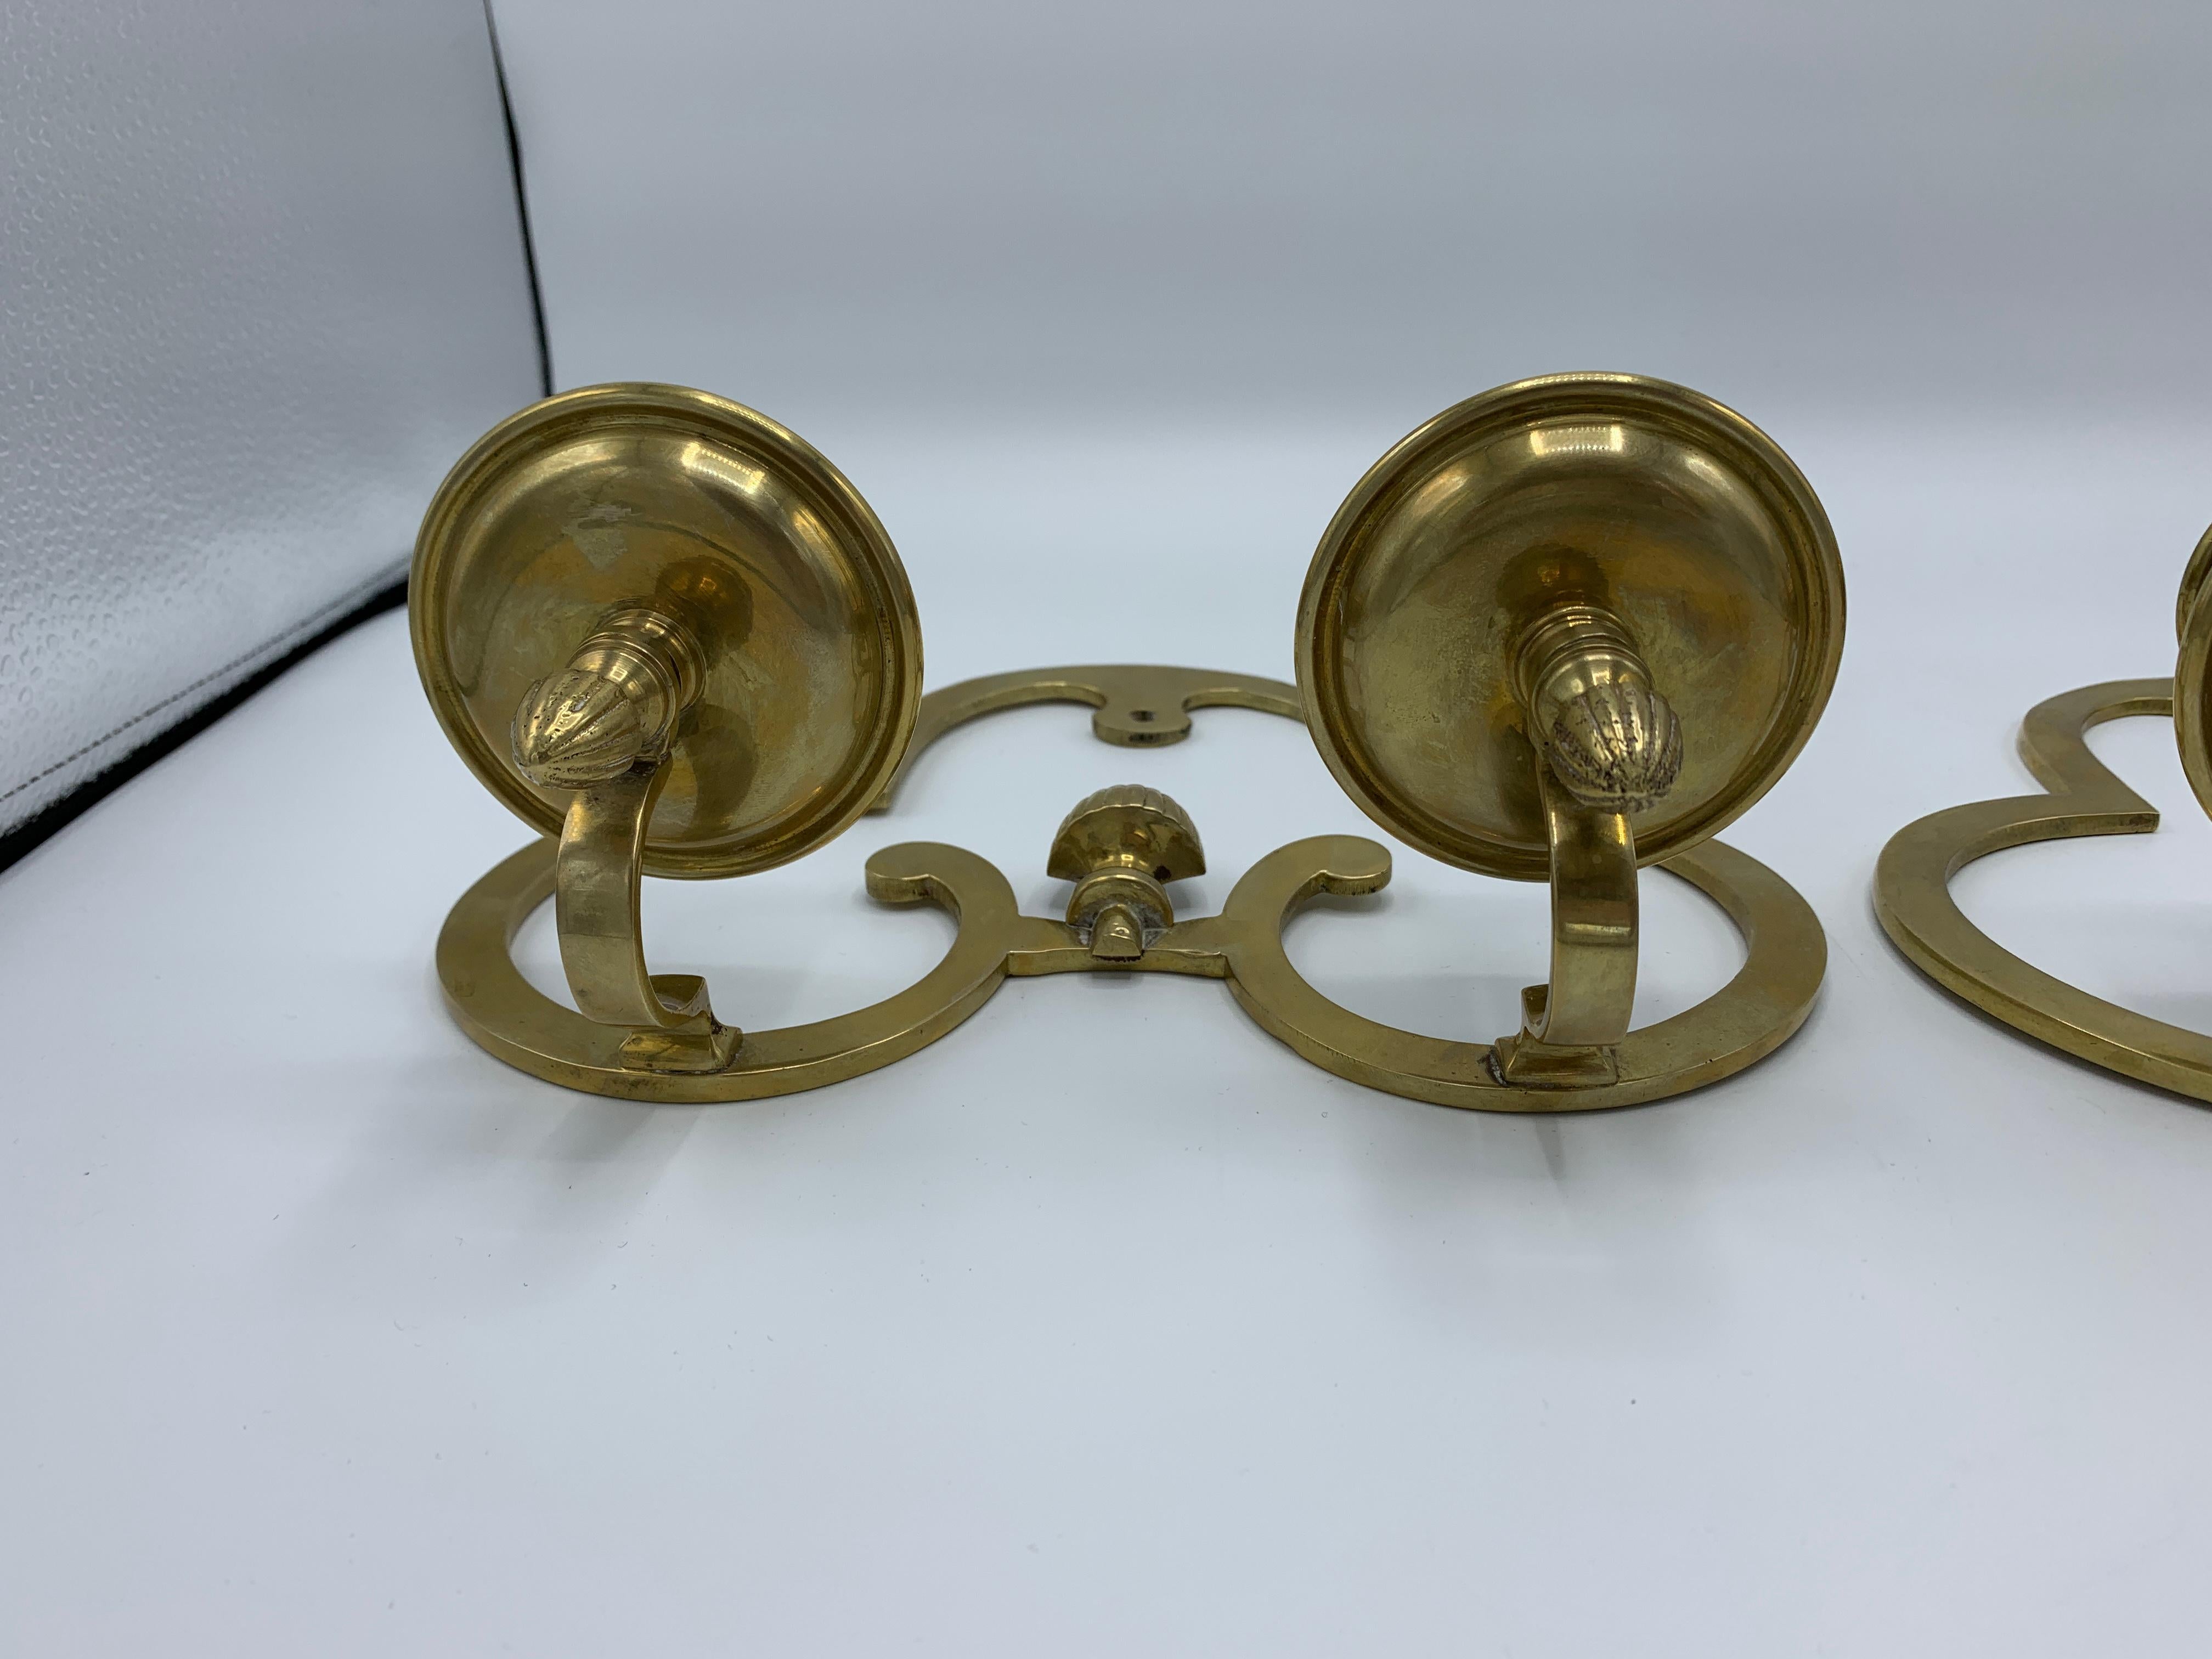 1970s Brass Candlestick Wall Sconces, Pair 1